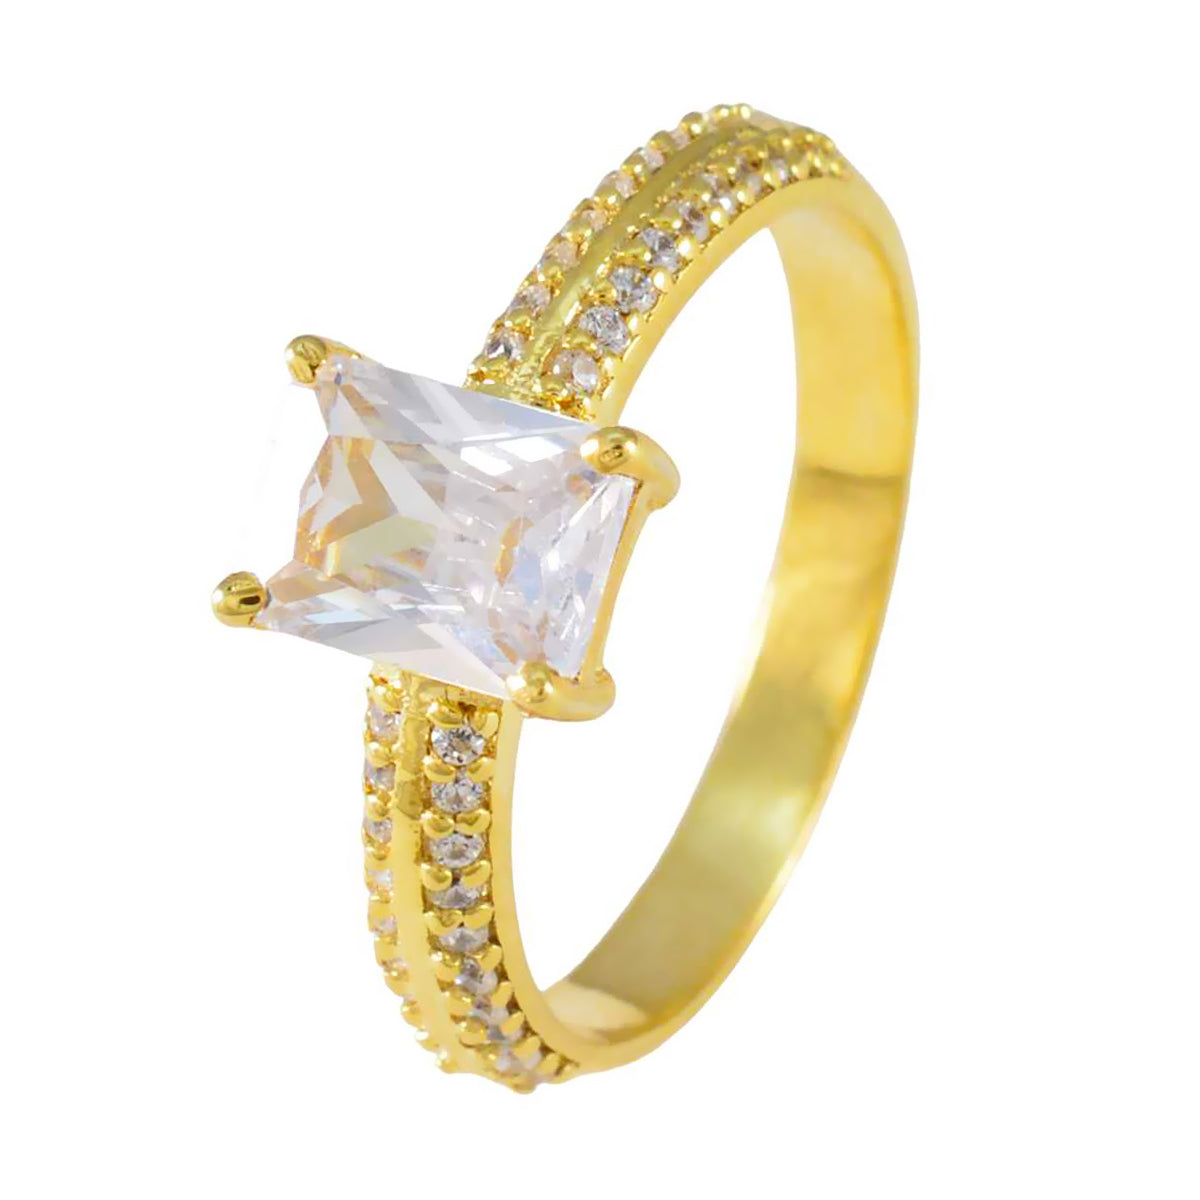 Riyo Choice Silver Ring With Yellow Gold Plating White CZ Stone Octagon Shape Prong Setting Designer Jewelry Easter Ring